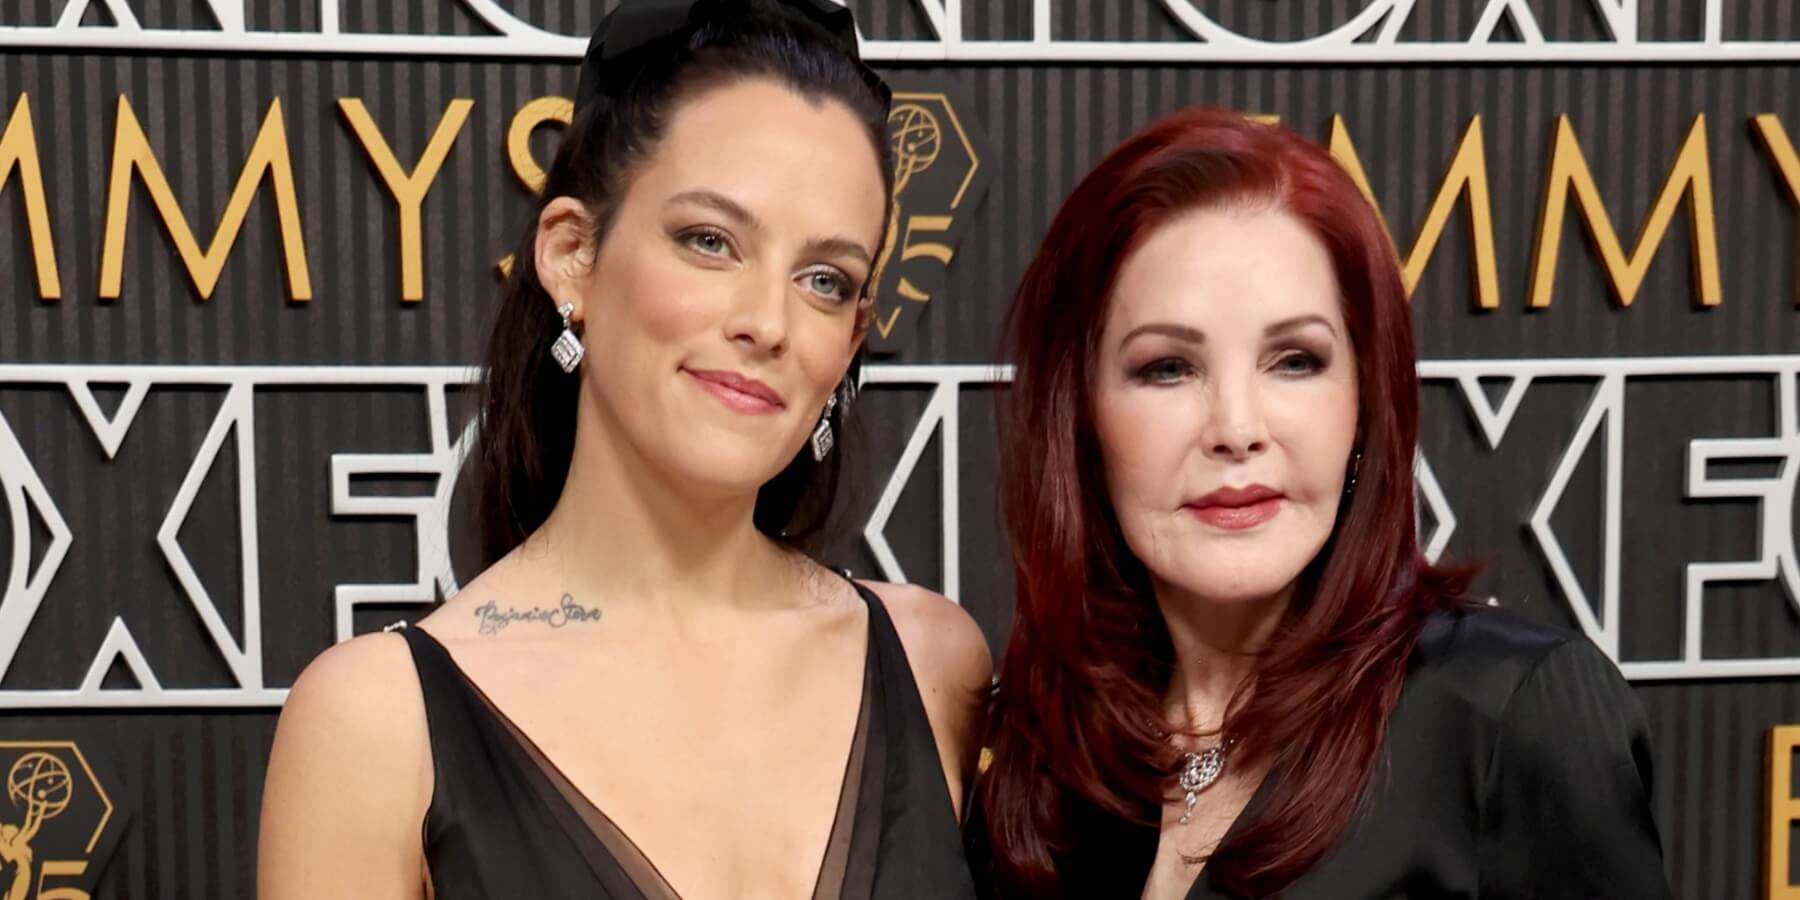 Riley Keough and Priscilla Presley attend the 75th Annual Emmy Awards.